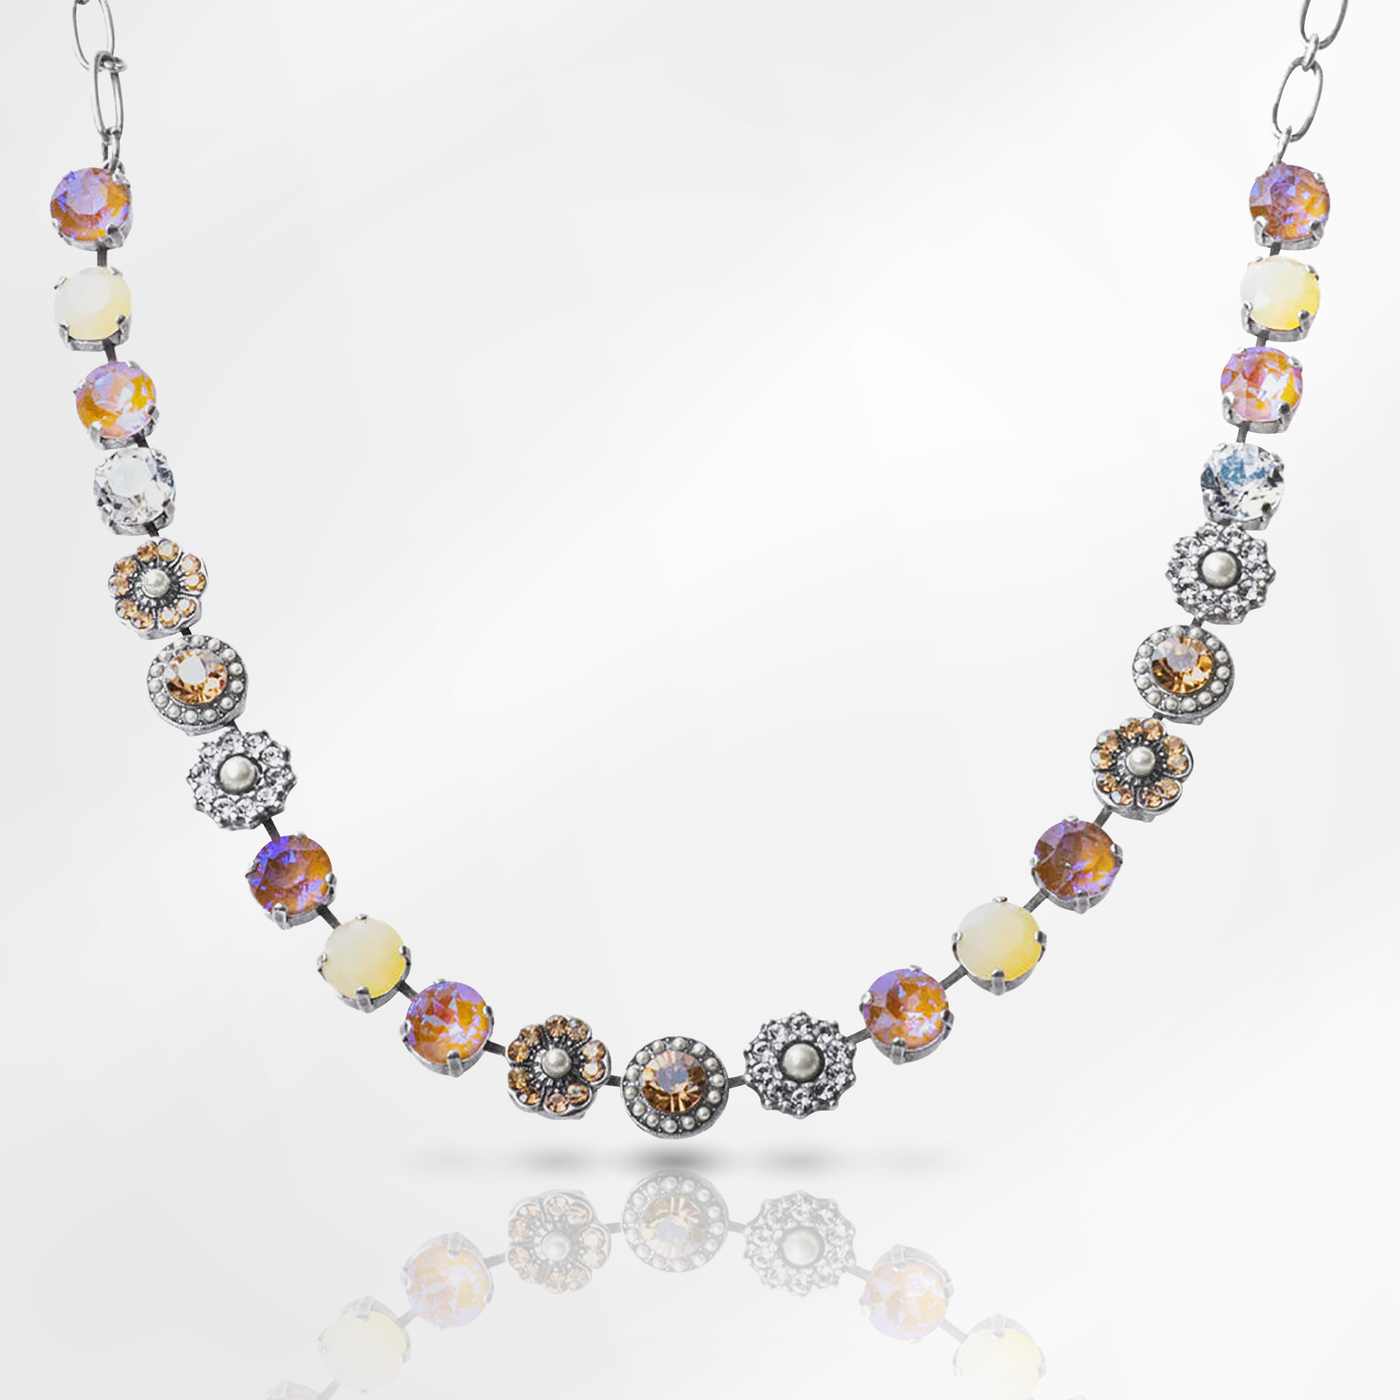 Lovable Mixed Element "Butter Pecan" Necklace